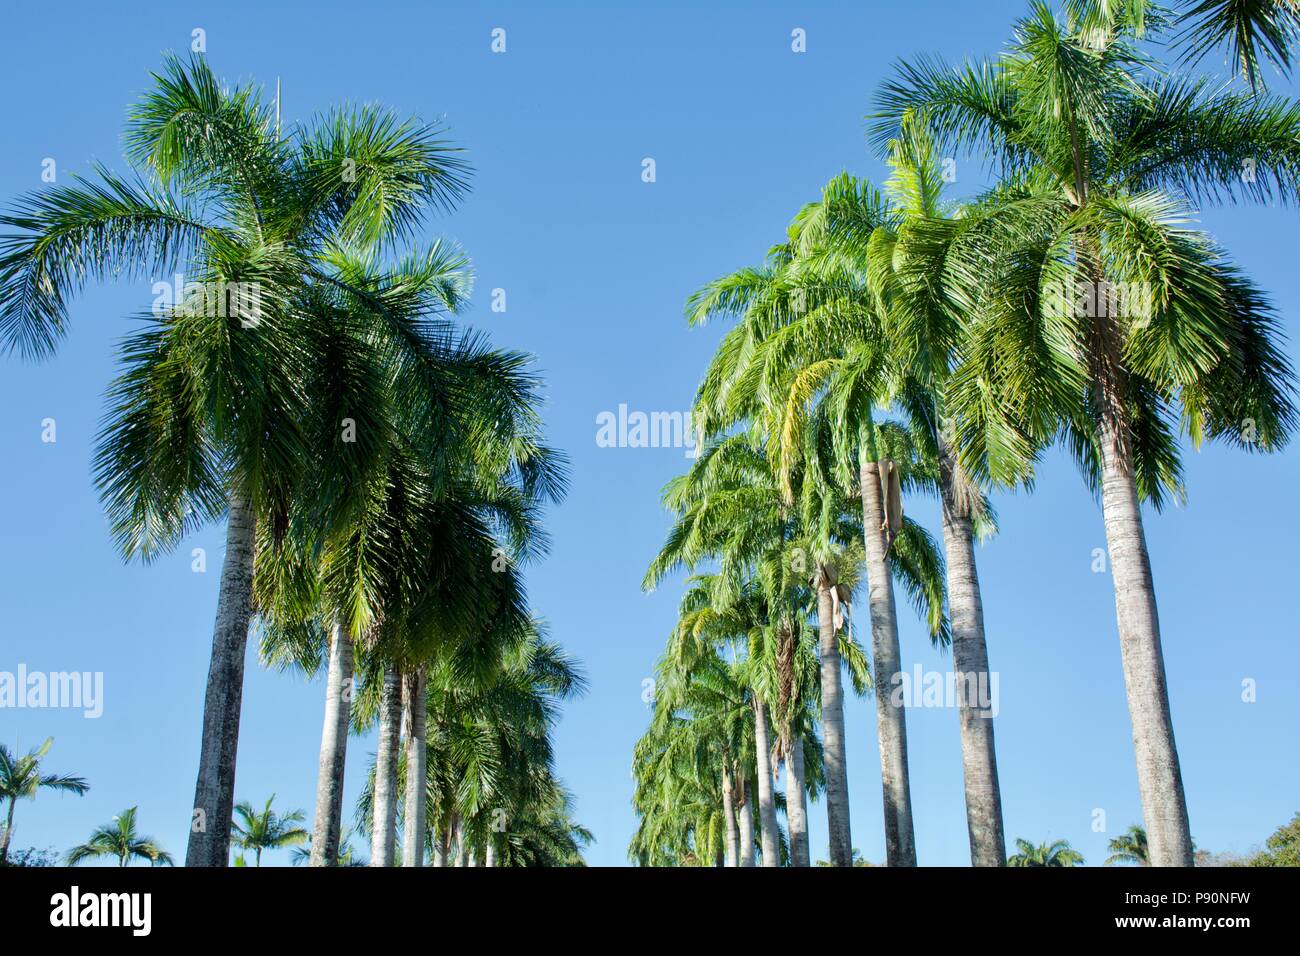 Avenue of Cuban Royal Palm Palms  with tall trunks and brilliant green fronds agains a clear blue sky Stock Photo